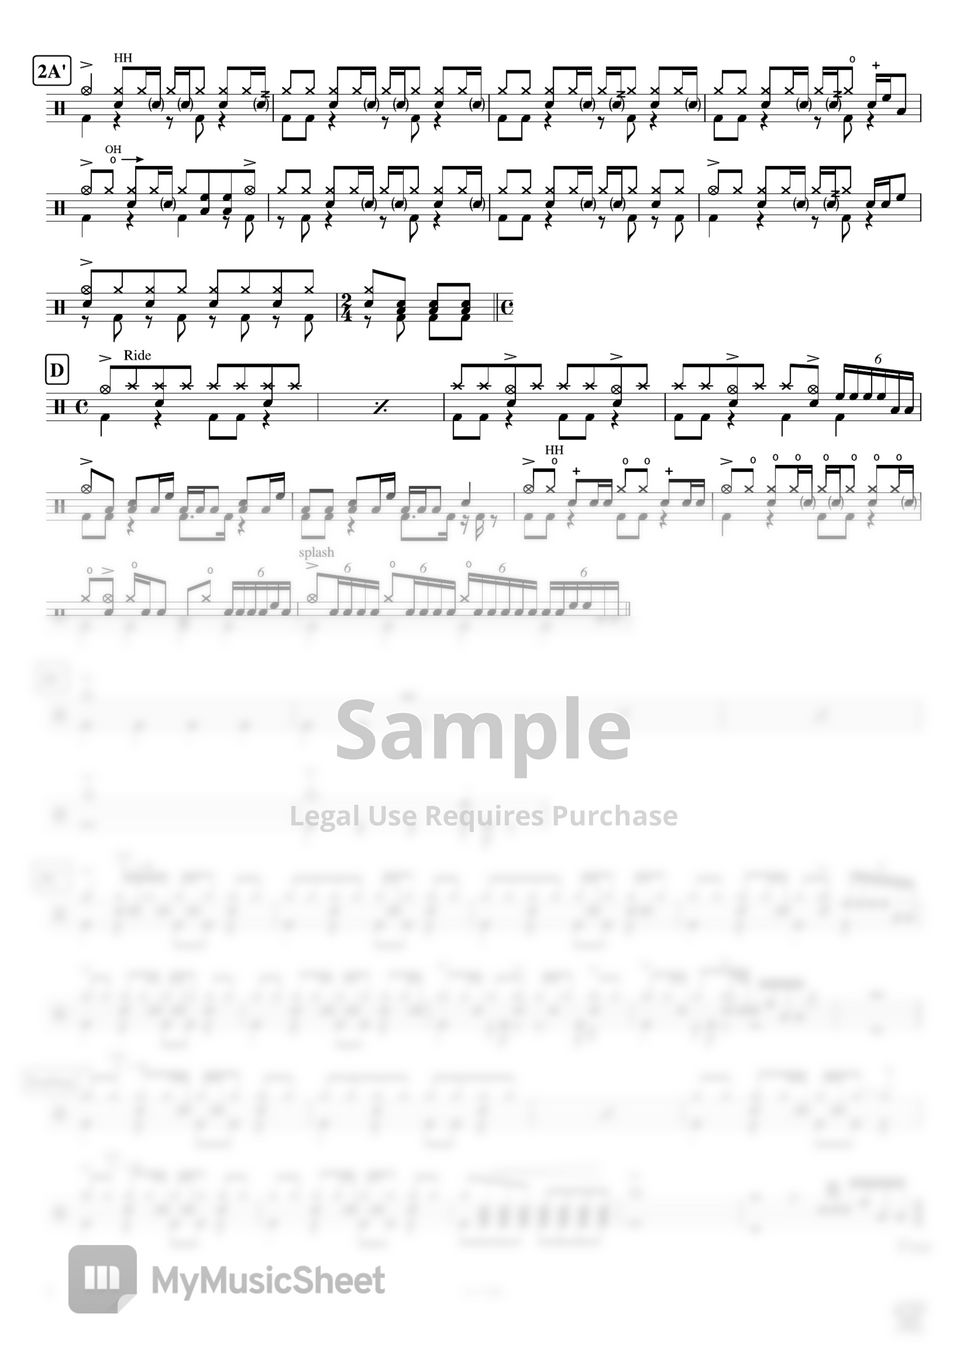 Saucy Dog - Itsuka / いつか by Cookai's J-pop Drum sheet music!!!